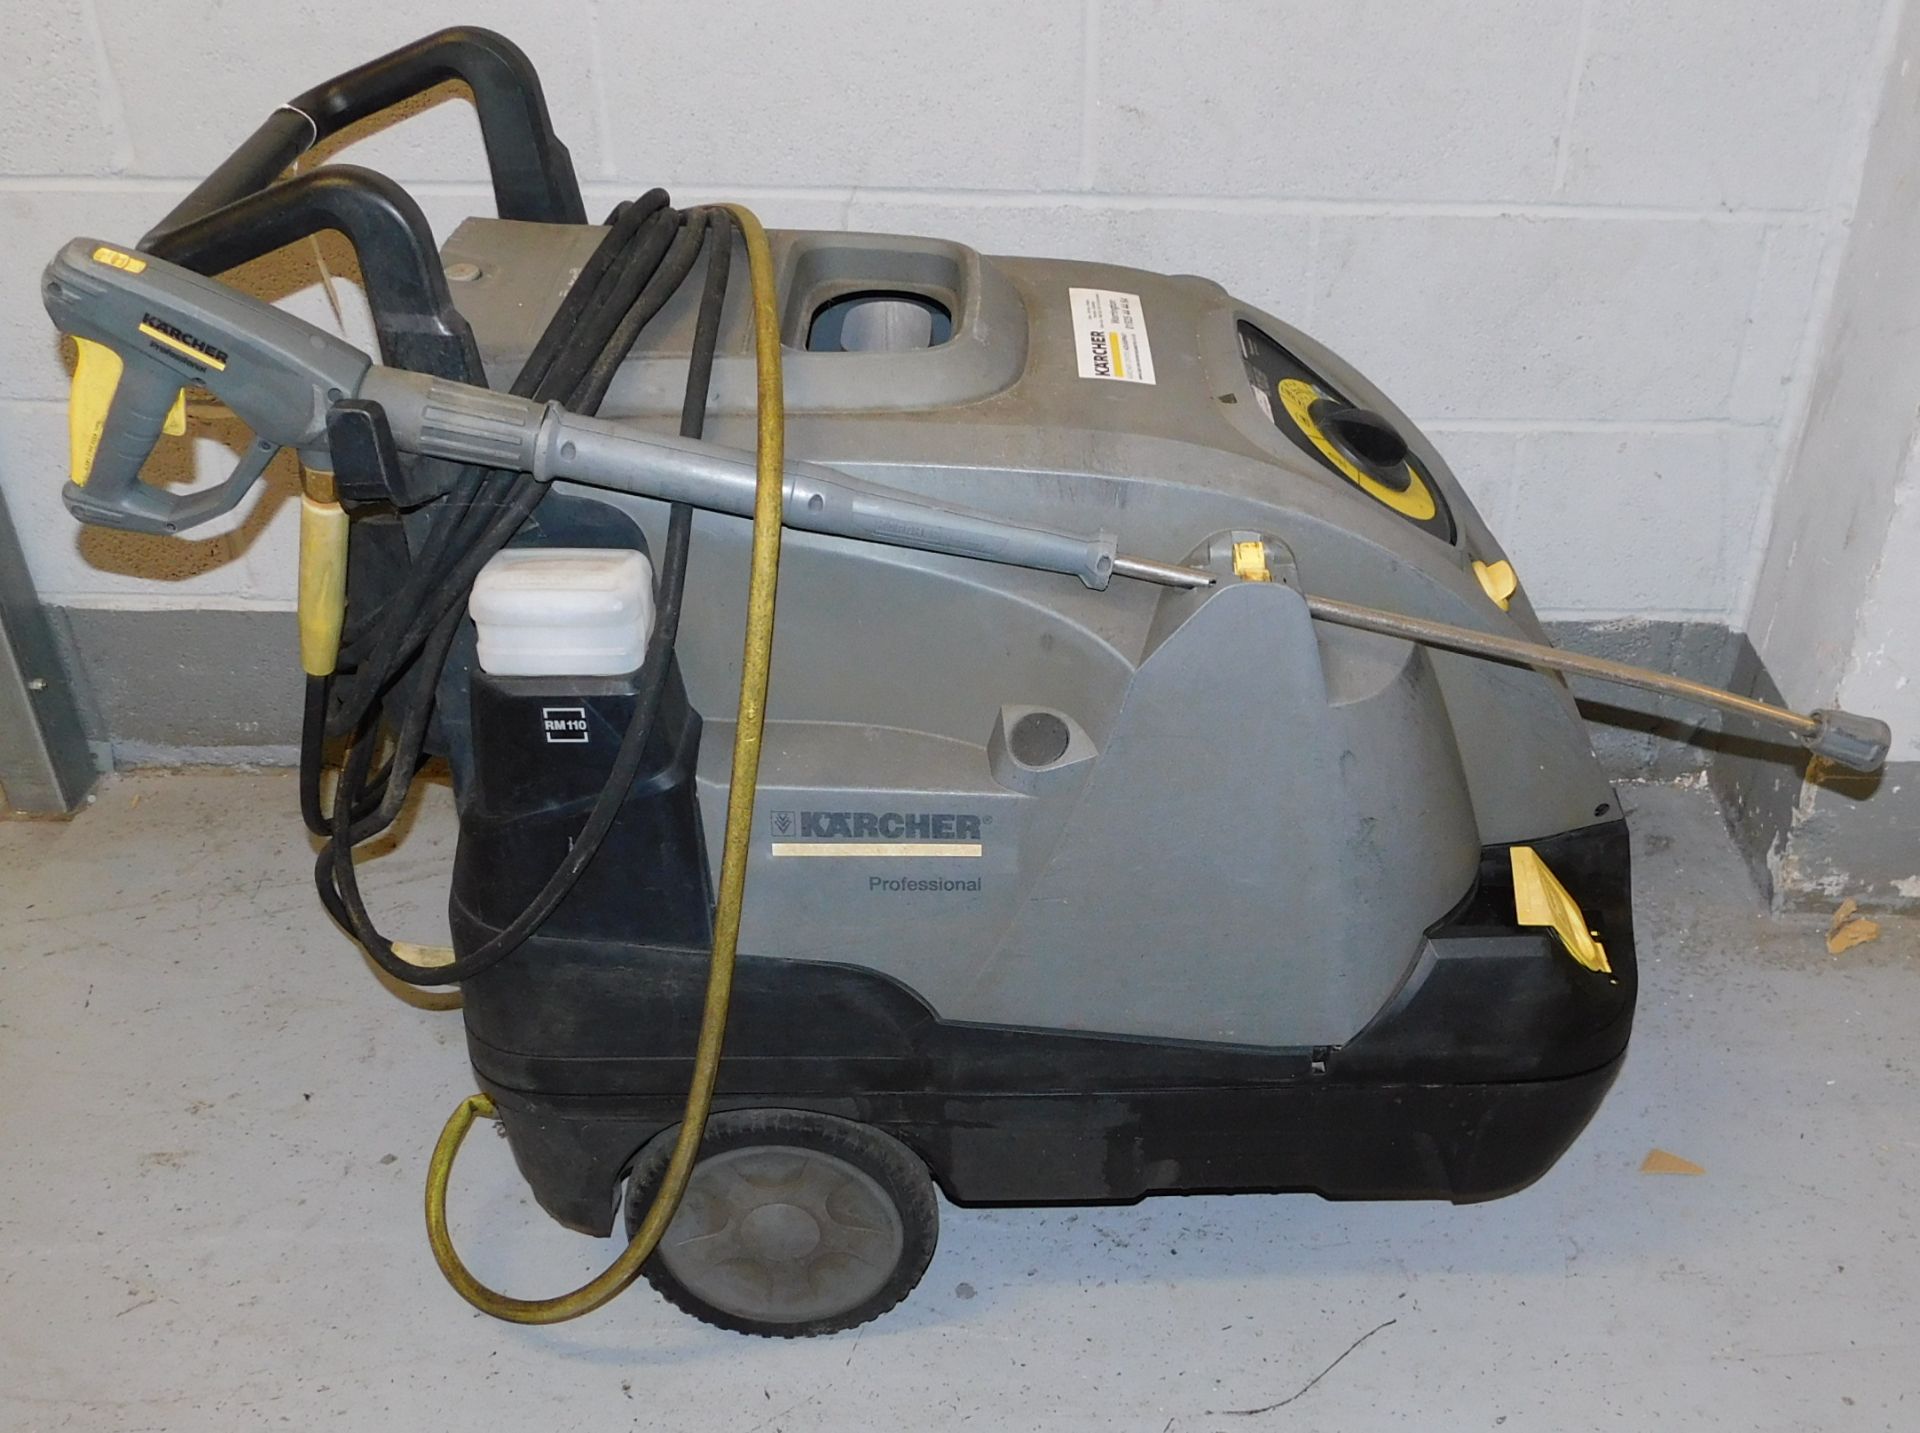 Karcher 6/10-4C Pressure Washer, Serial No; 010094 (2017) (Located Stockport – See General Notes for